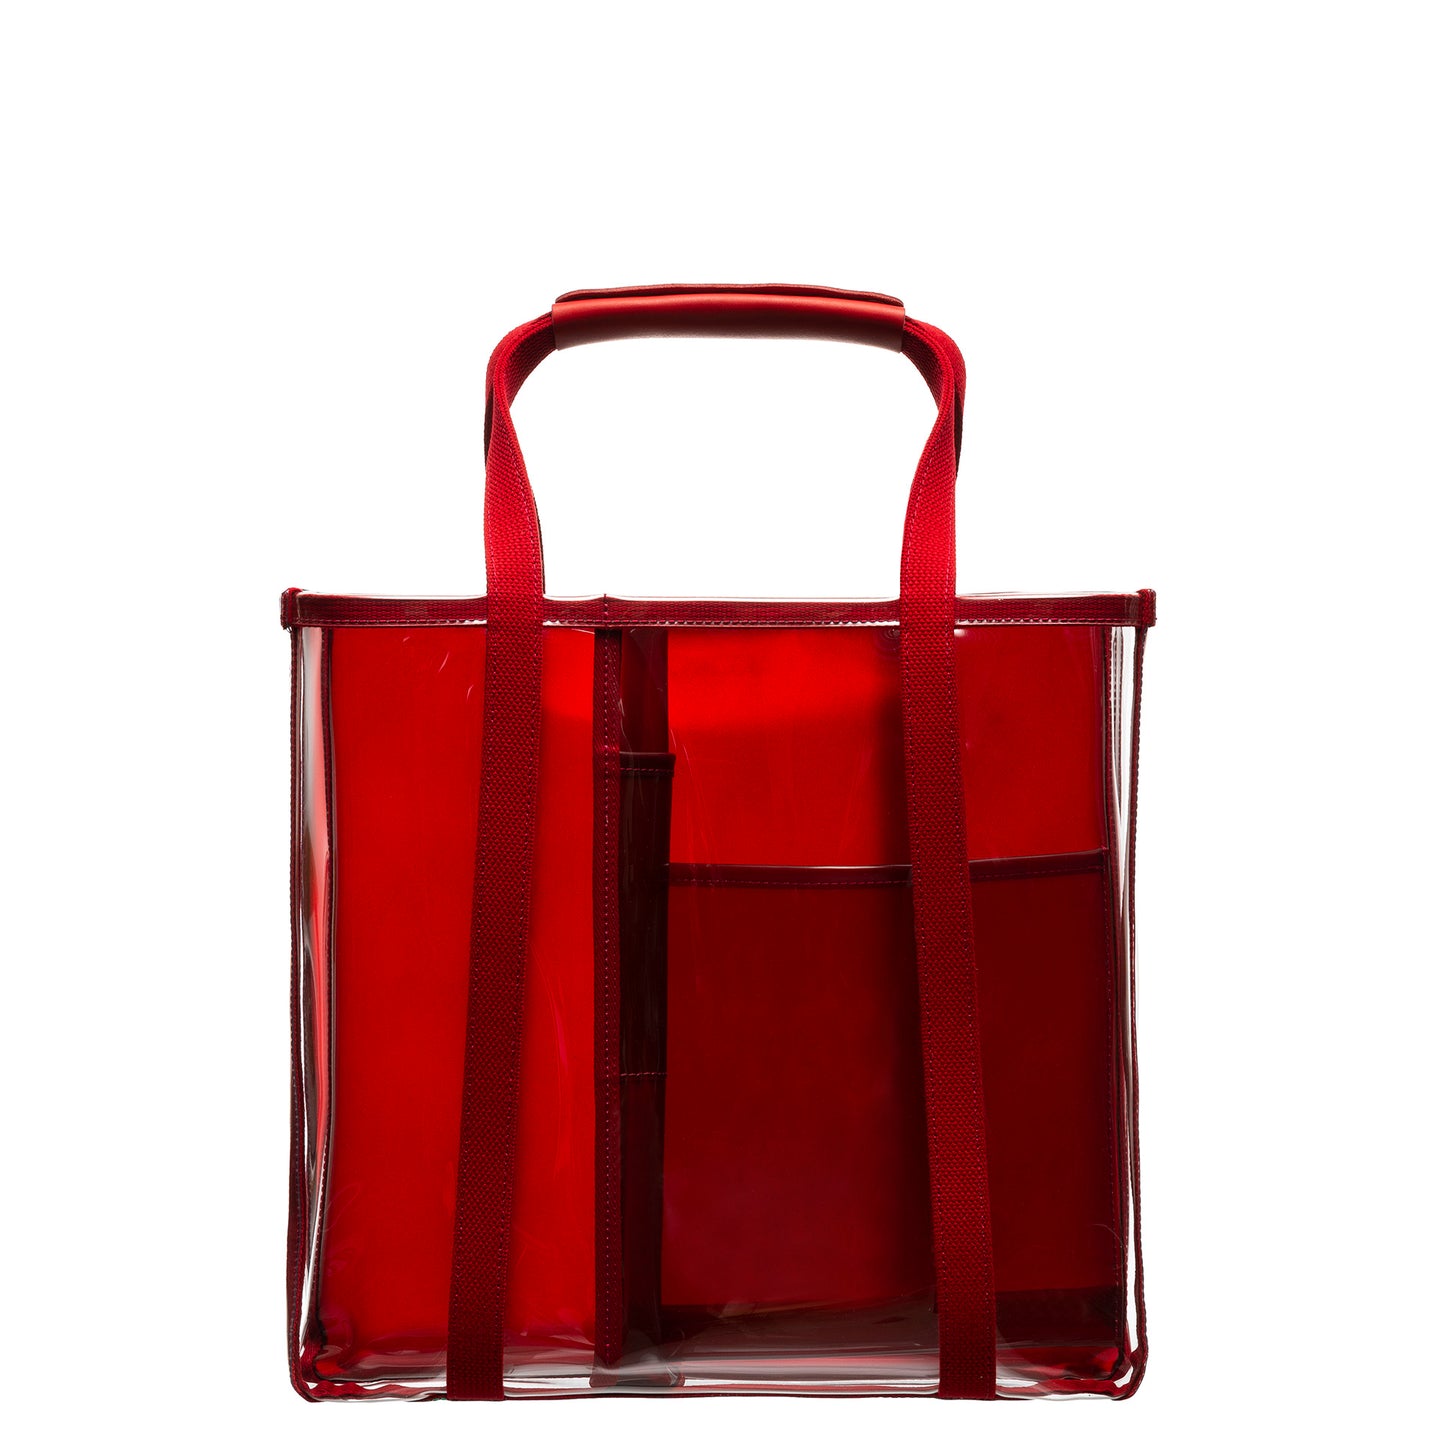 INTERNAL RED TOTE